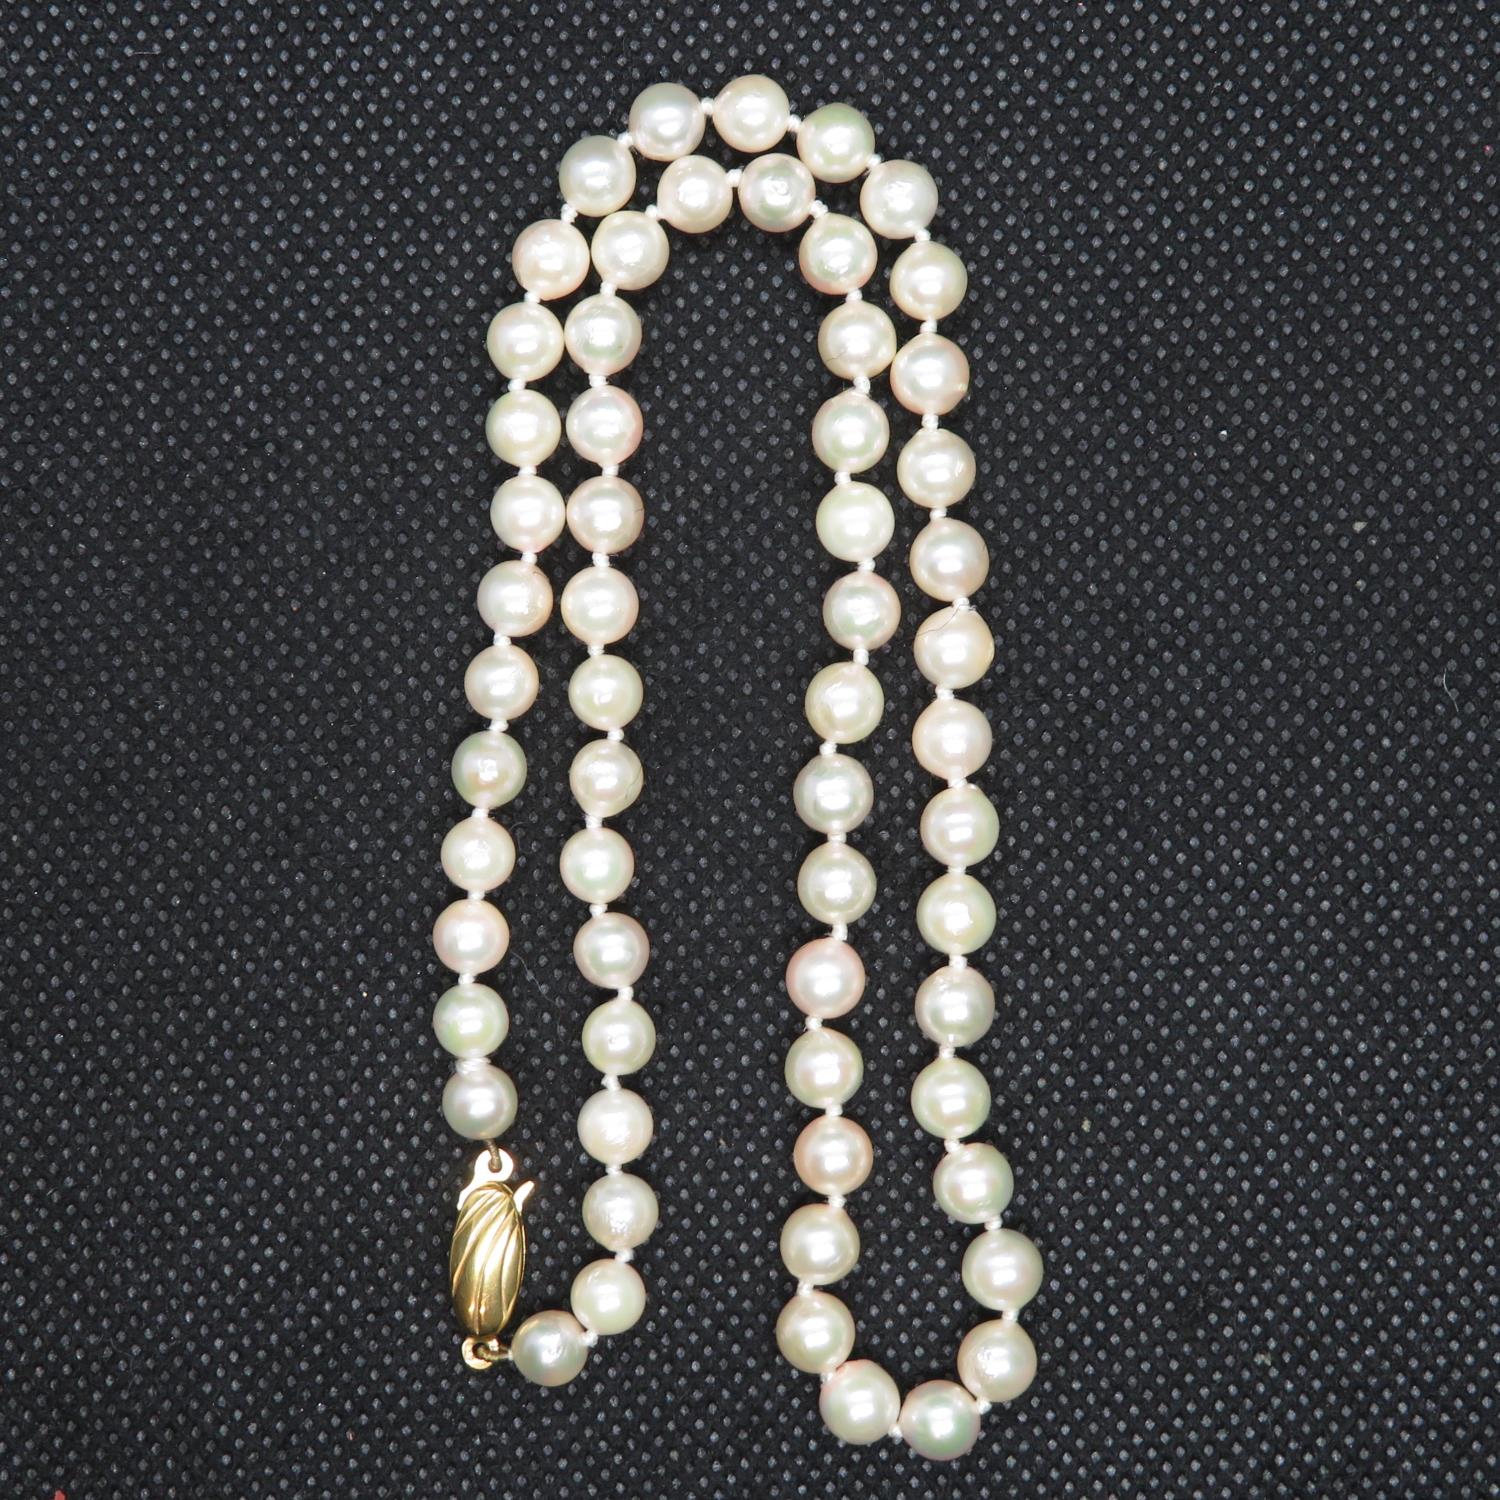 16" rope of 5.5mm cultured pearls with 9ct gold clasp